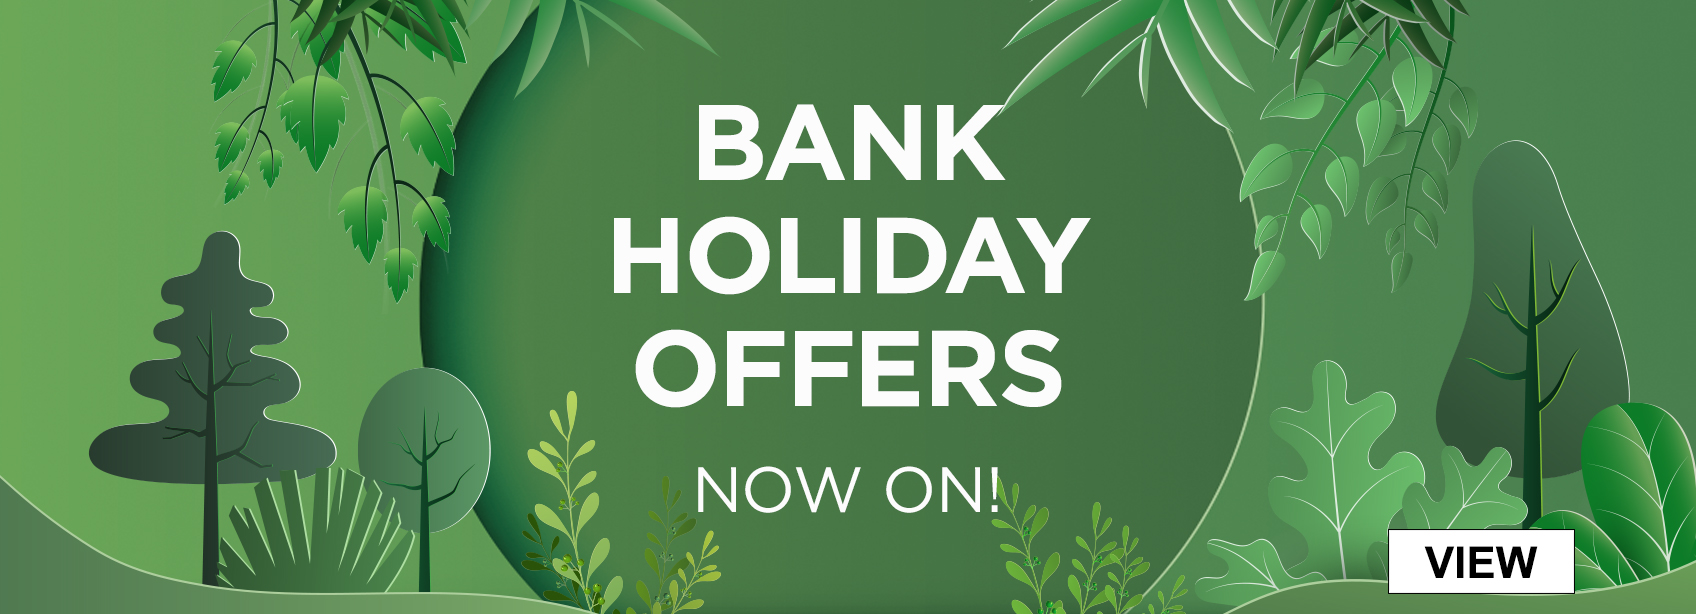 Bank Holiday Offers Now On!